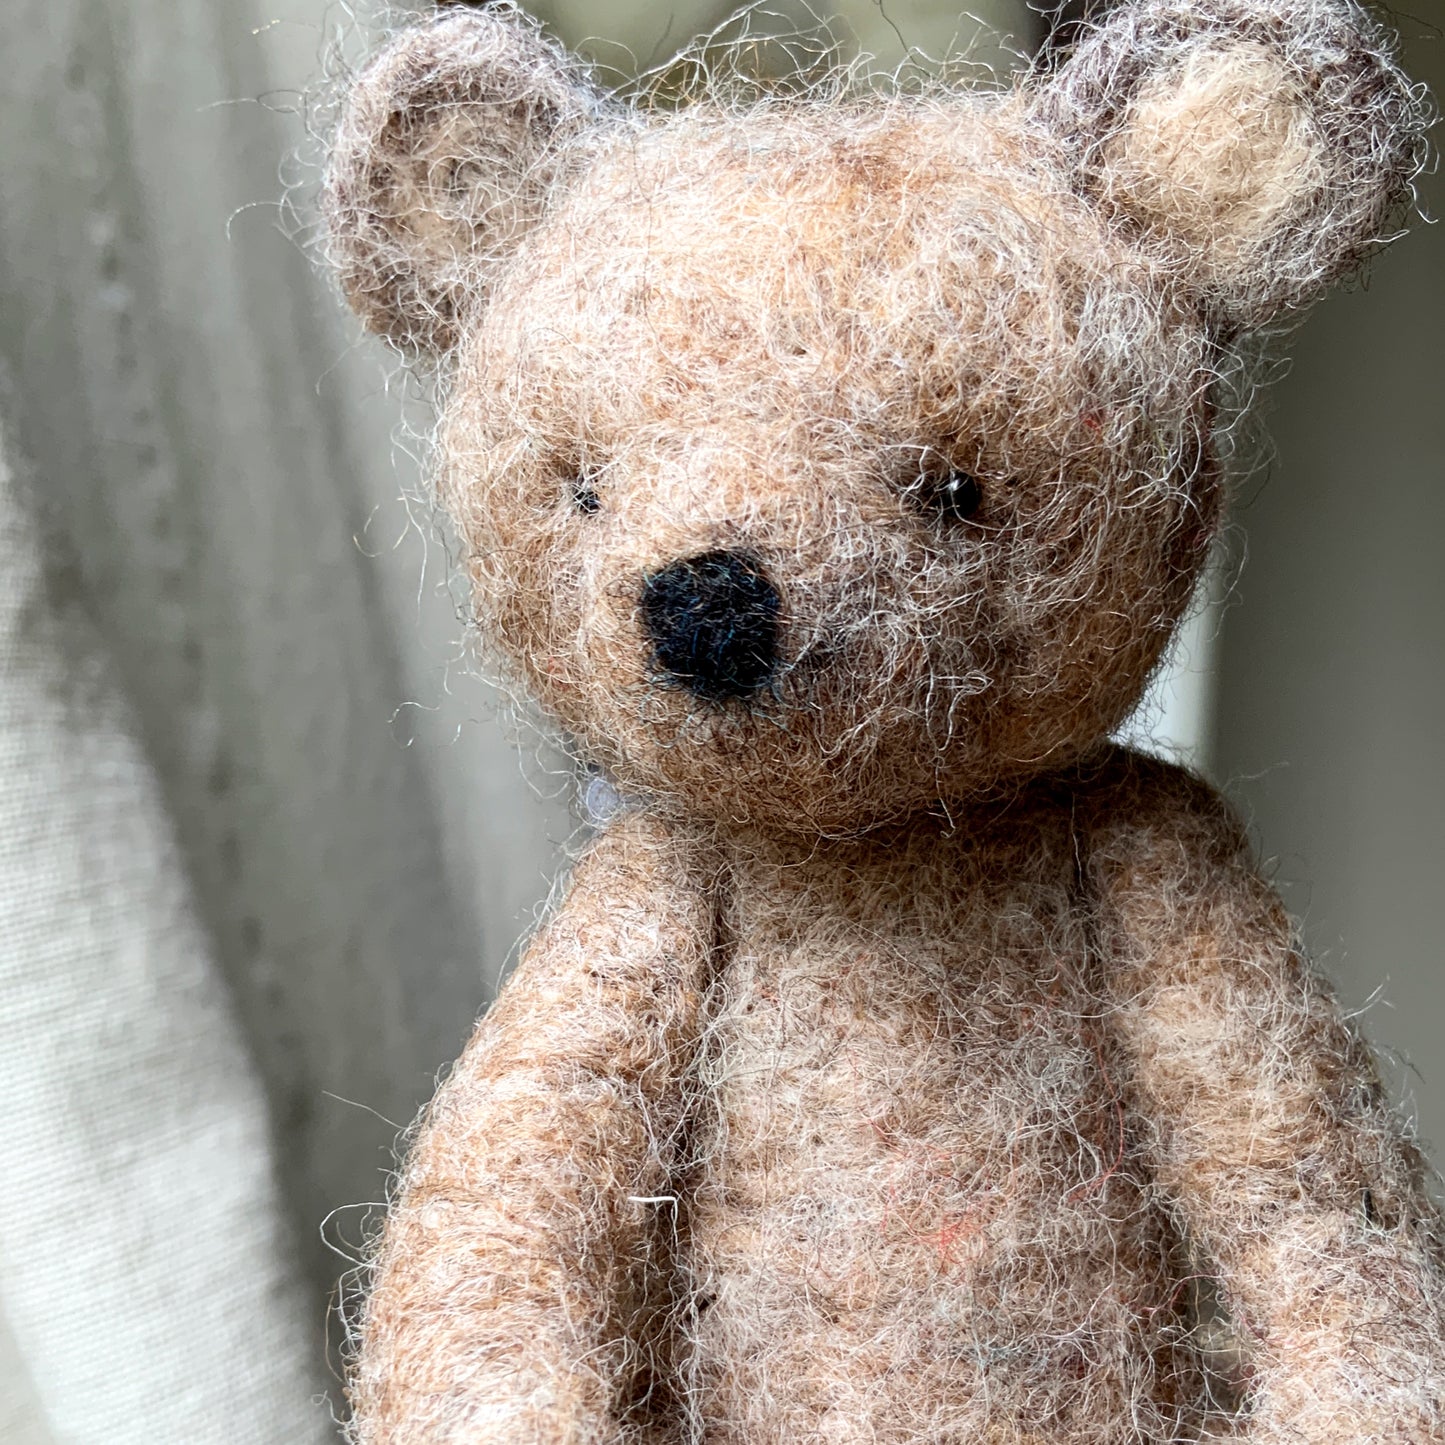 Needle Felted Articulated Teddy Bear | Friday 7th June | 10am to 2pm